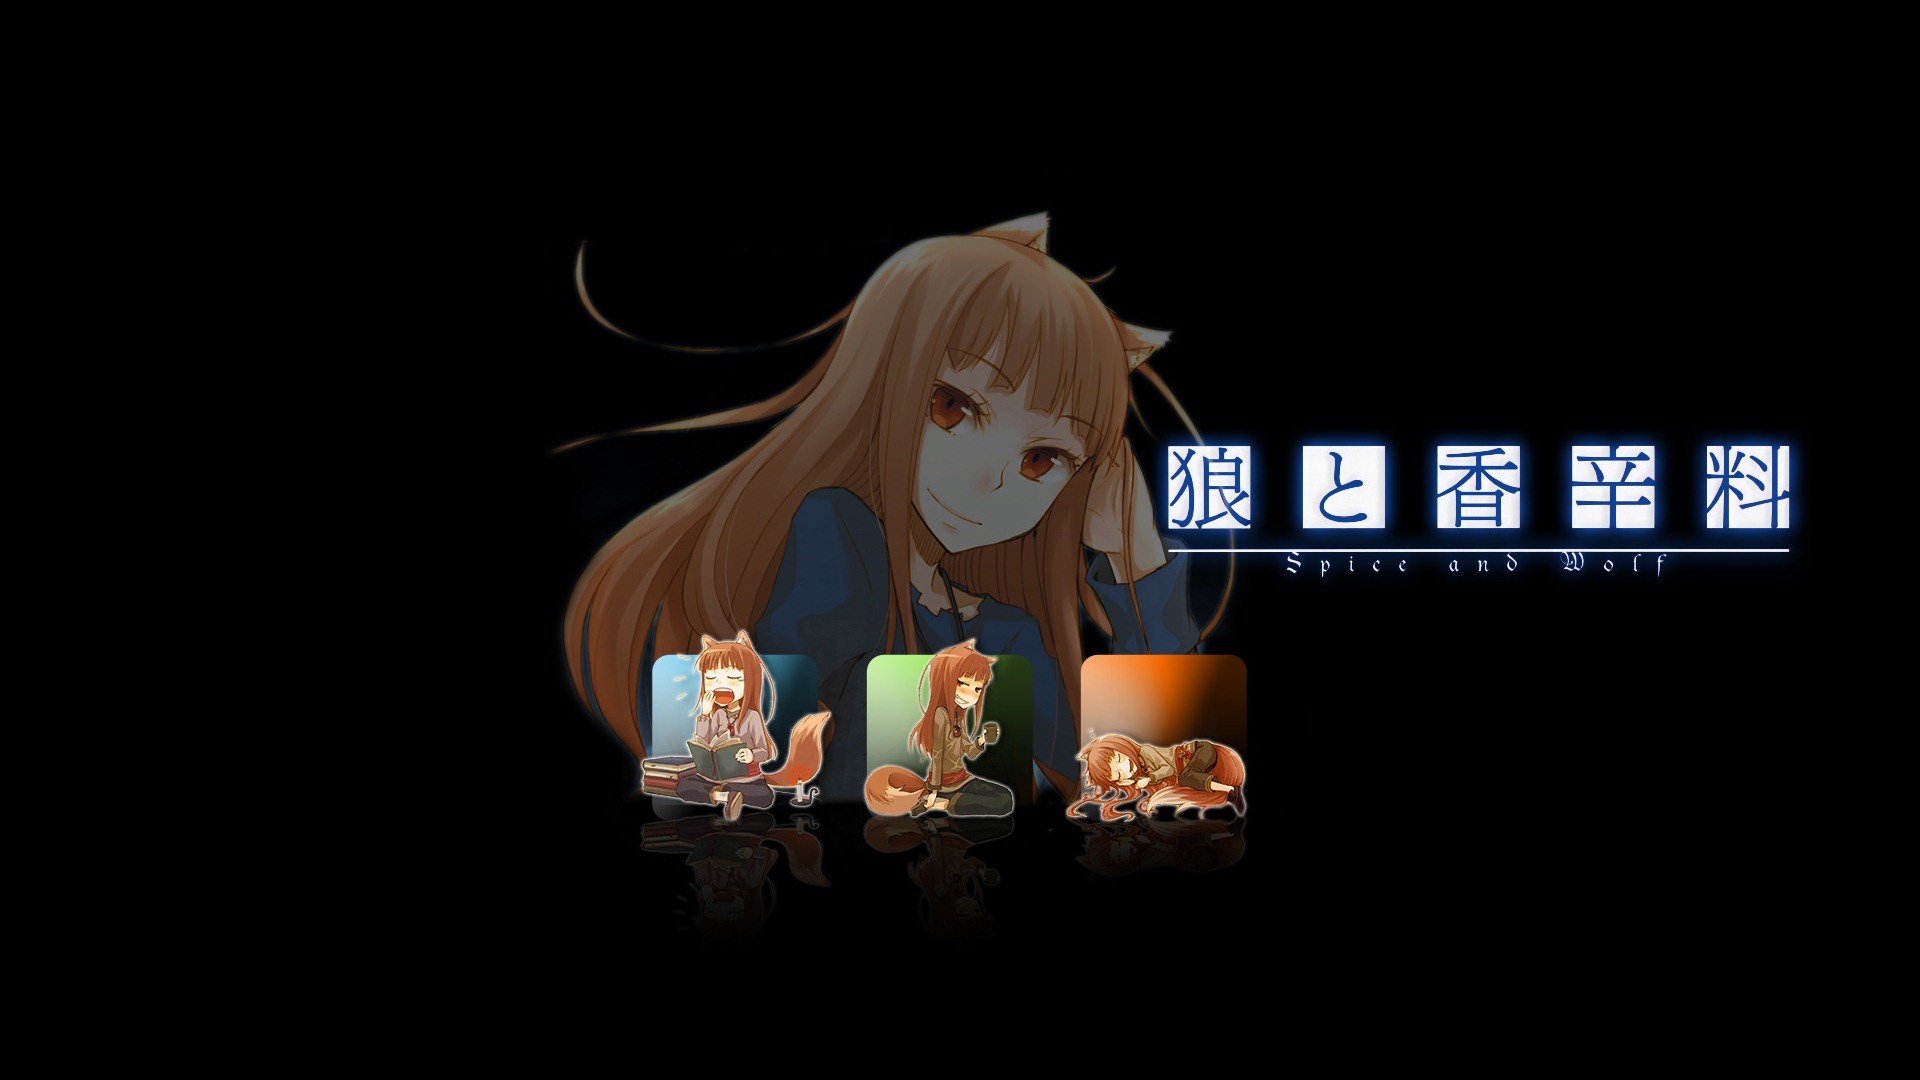 1920x1080 Spice and Wolf HD wallpapers #23 - .